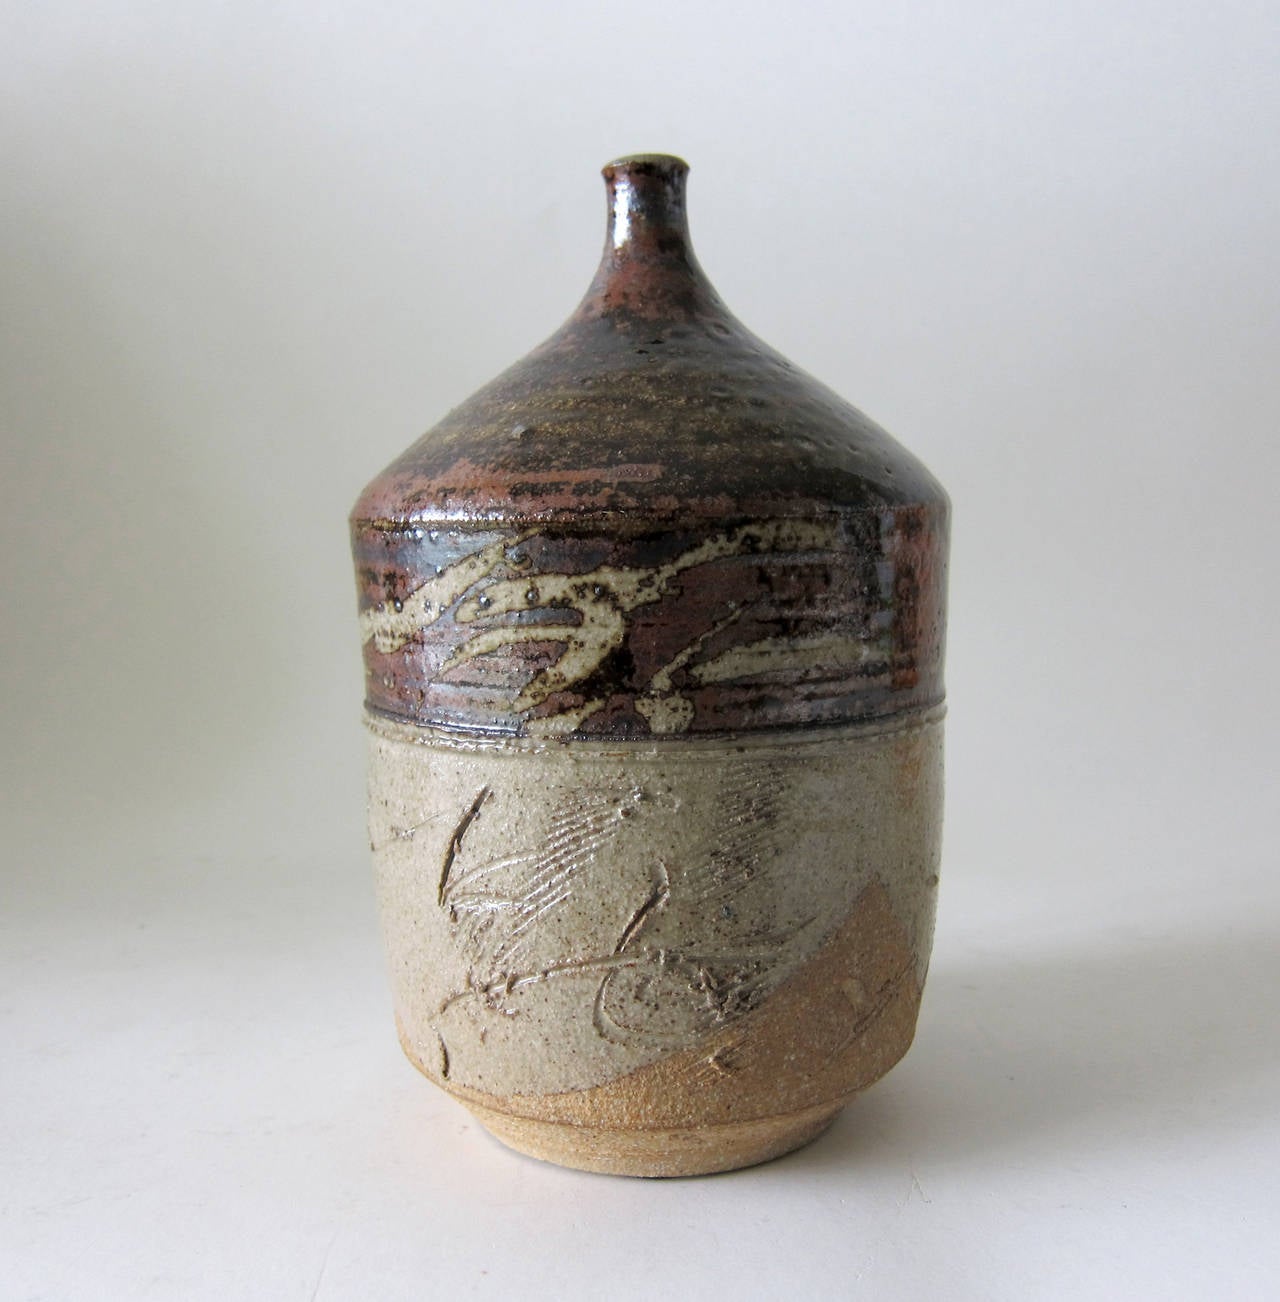 A spouted stoneware bottleneck vase with tenmoku glaze created by Paul Soldner of Claremont, California, circa 1960. Vase stands 9 1/8